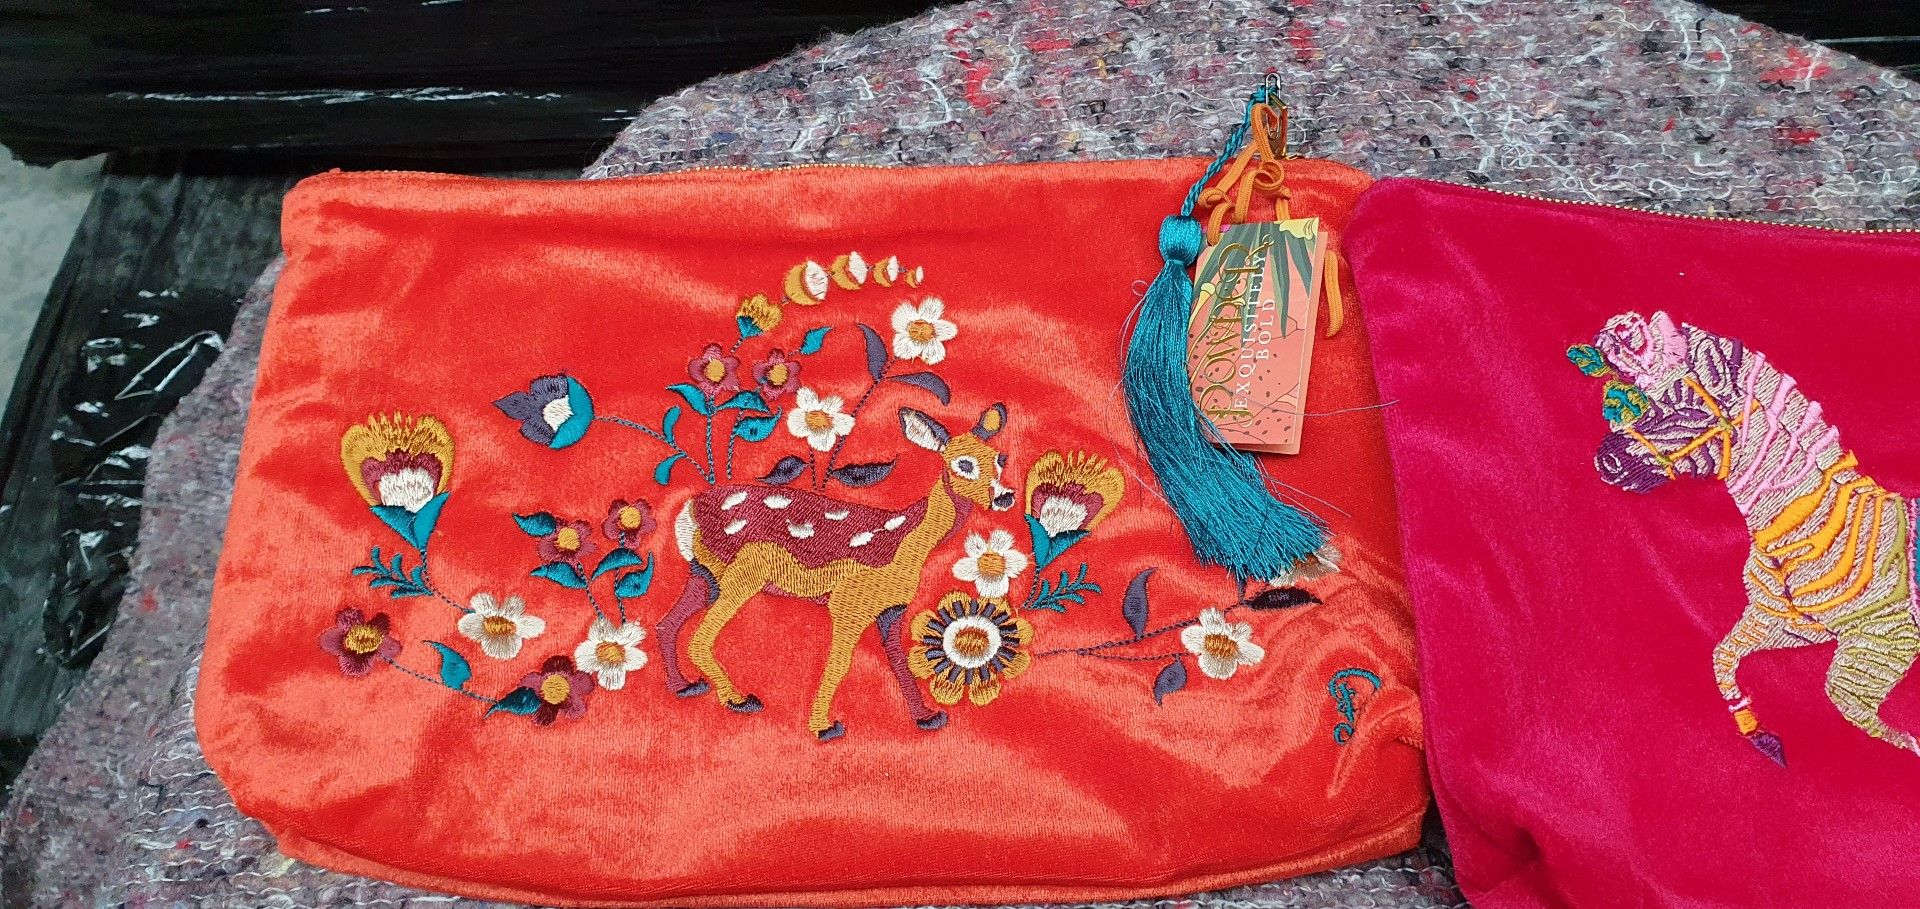 4 x Toiletries Bags By Powder Featuring a Velvet Material and Animal / Floral Stitched Designs - New - Image 5 of 5